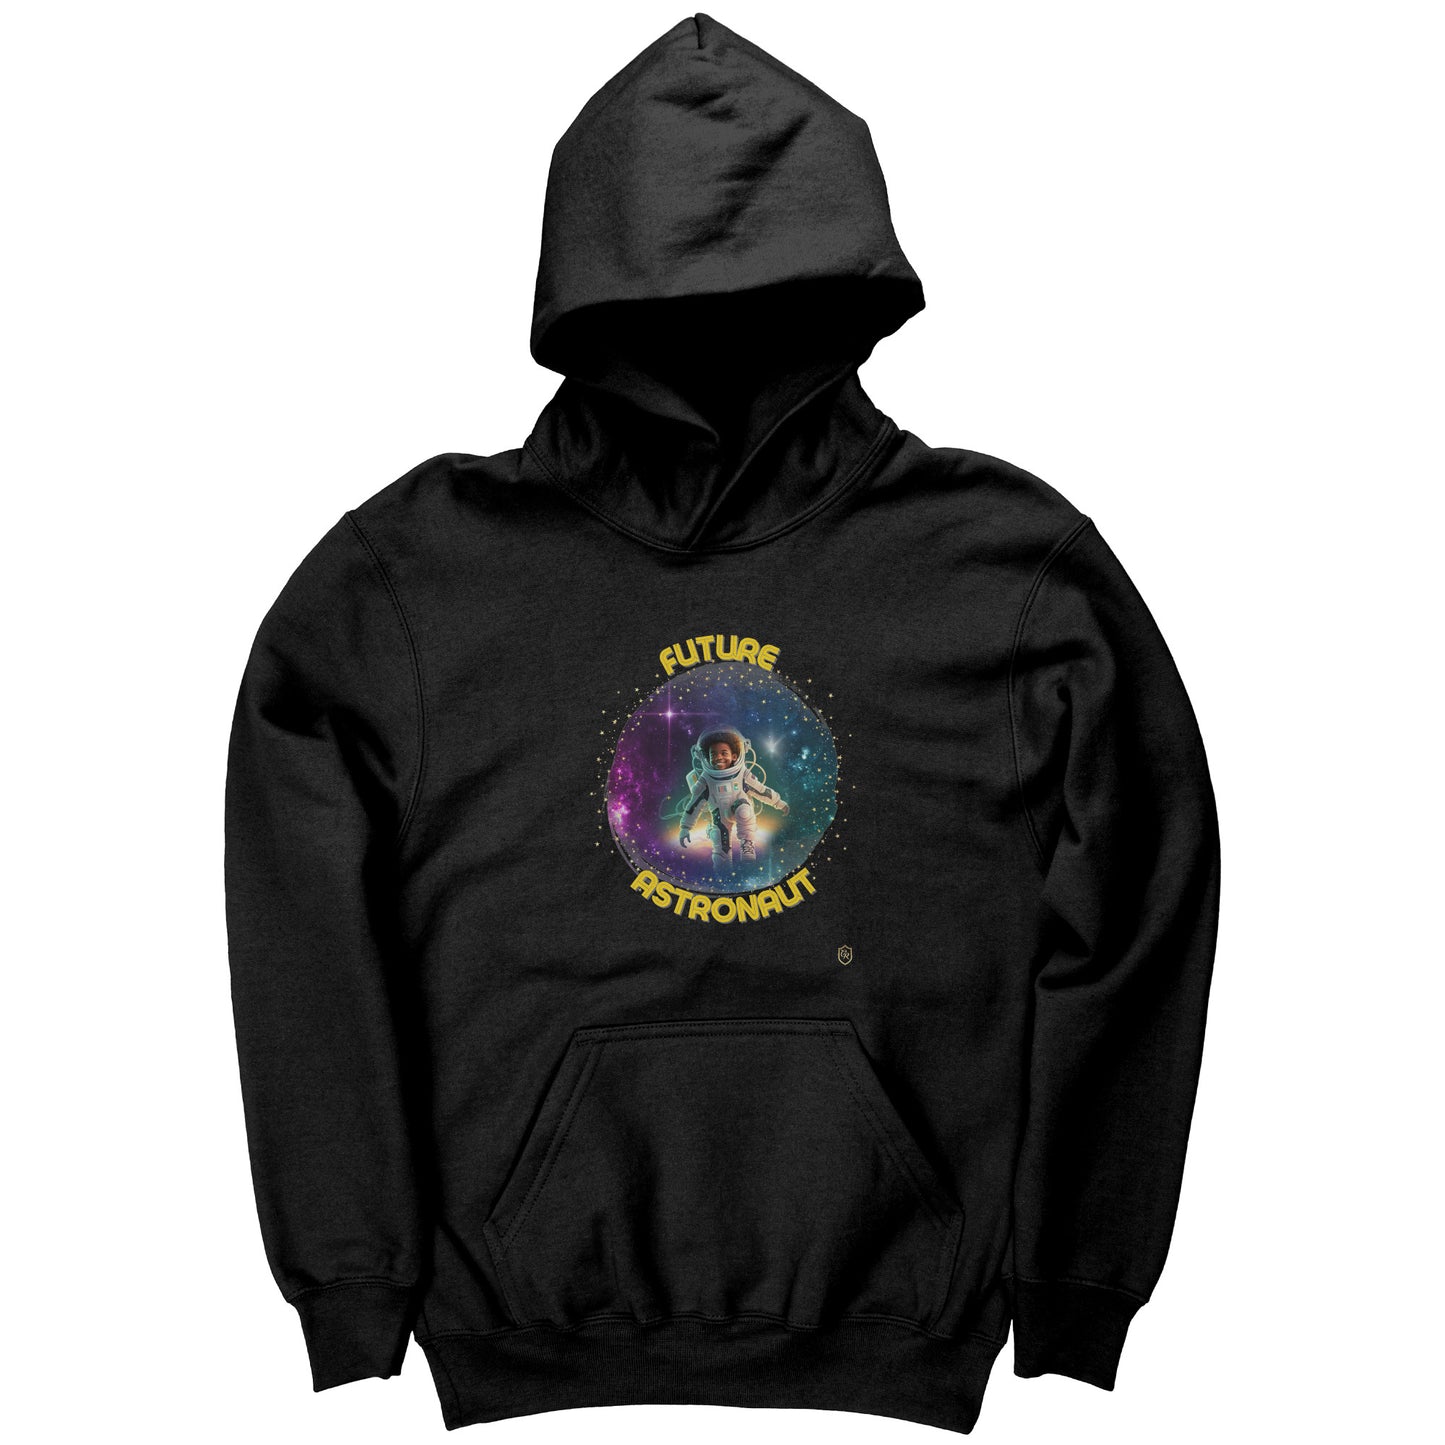 Young Boy's Galactic Explorer Hoodie: The Official Astronaut Gear of the Future